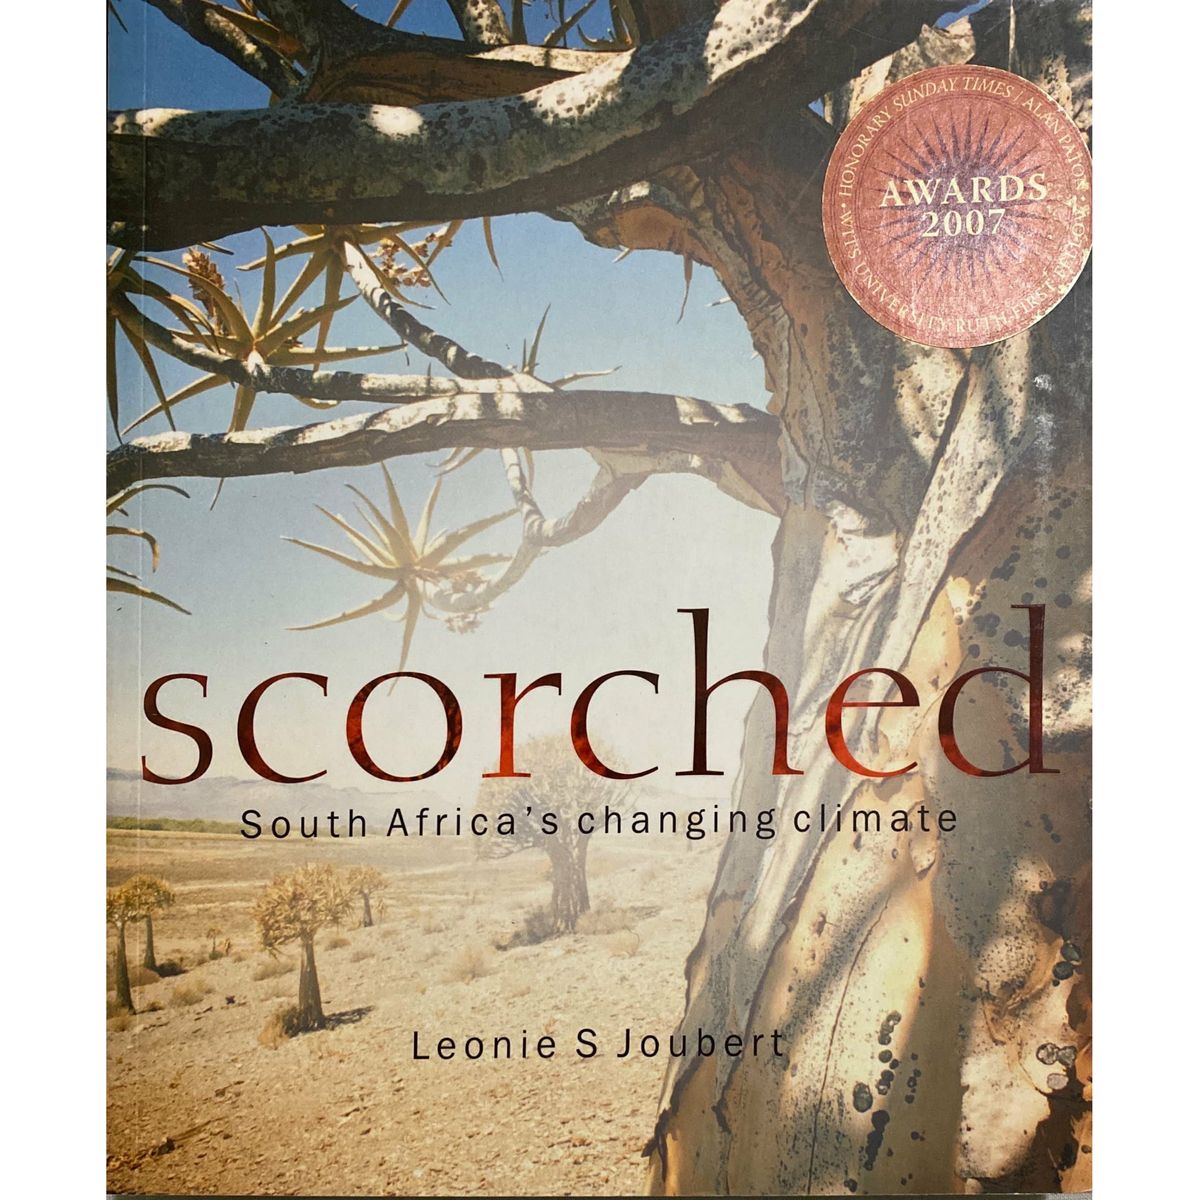 ISBN: 9781868144372 / 1868144372 - Scorched: South Africa's Changing Climate by Leonie S. Joubert [2006]